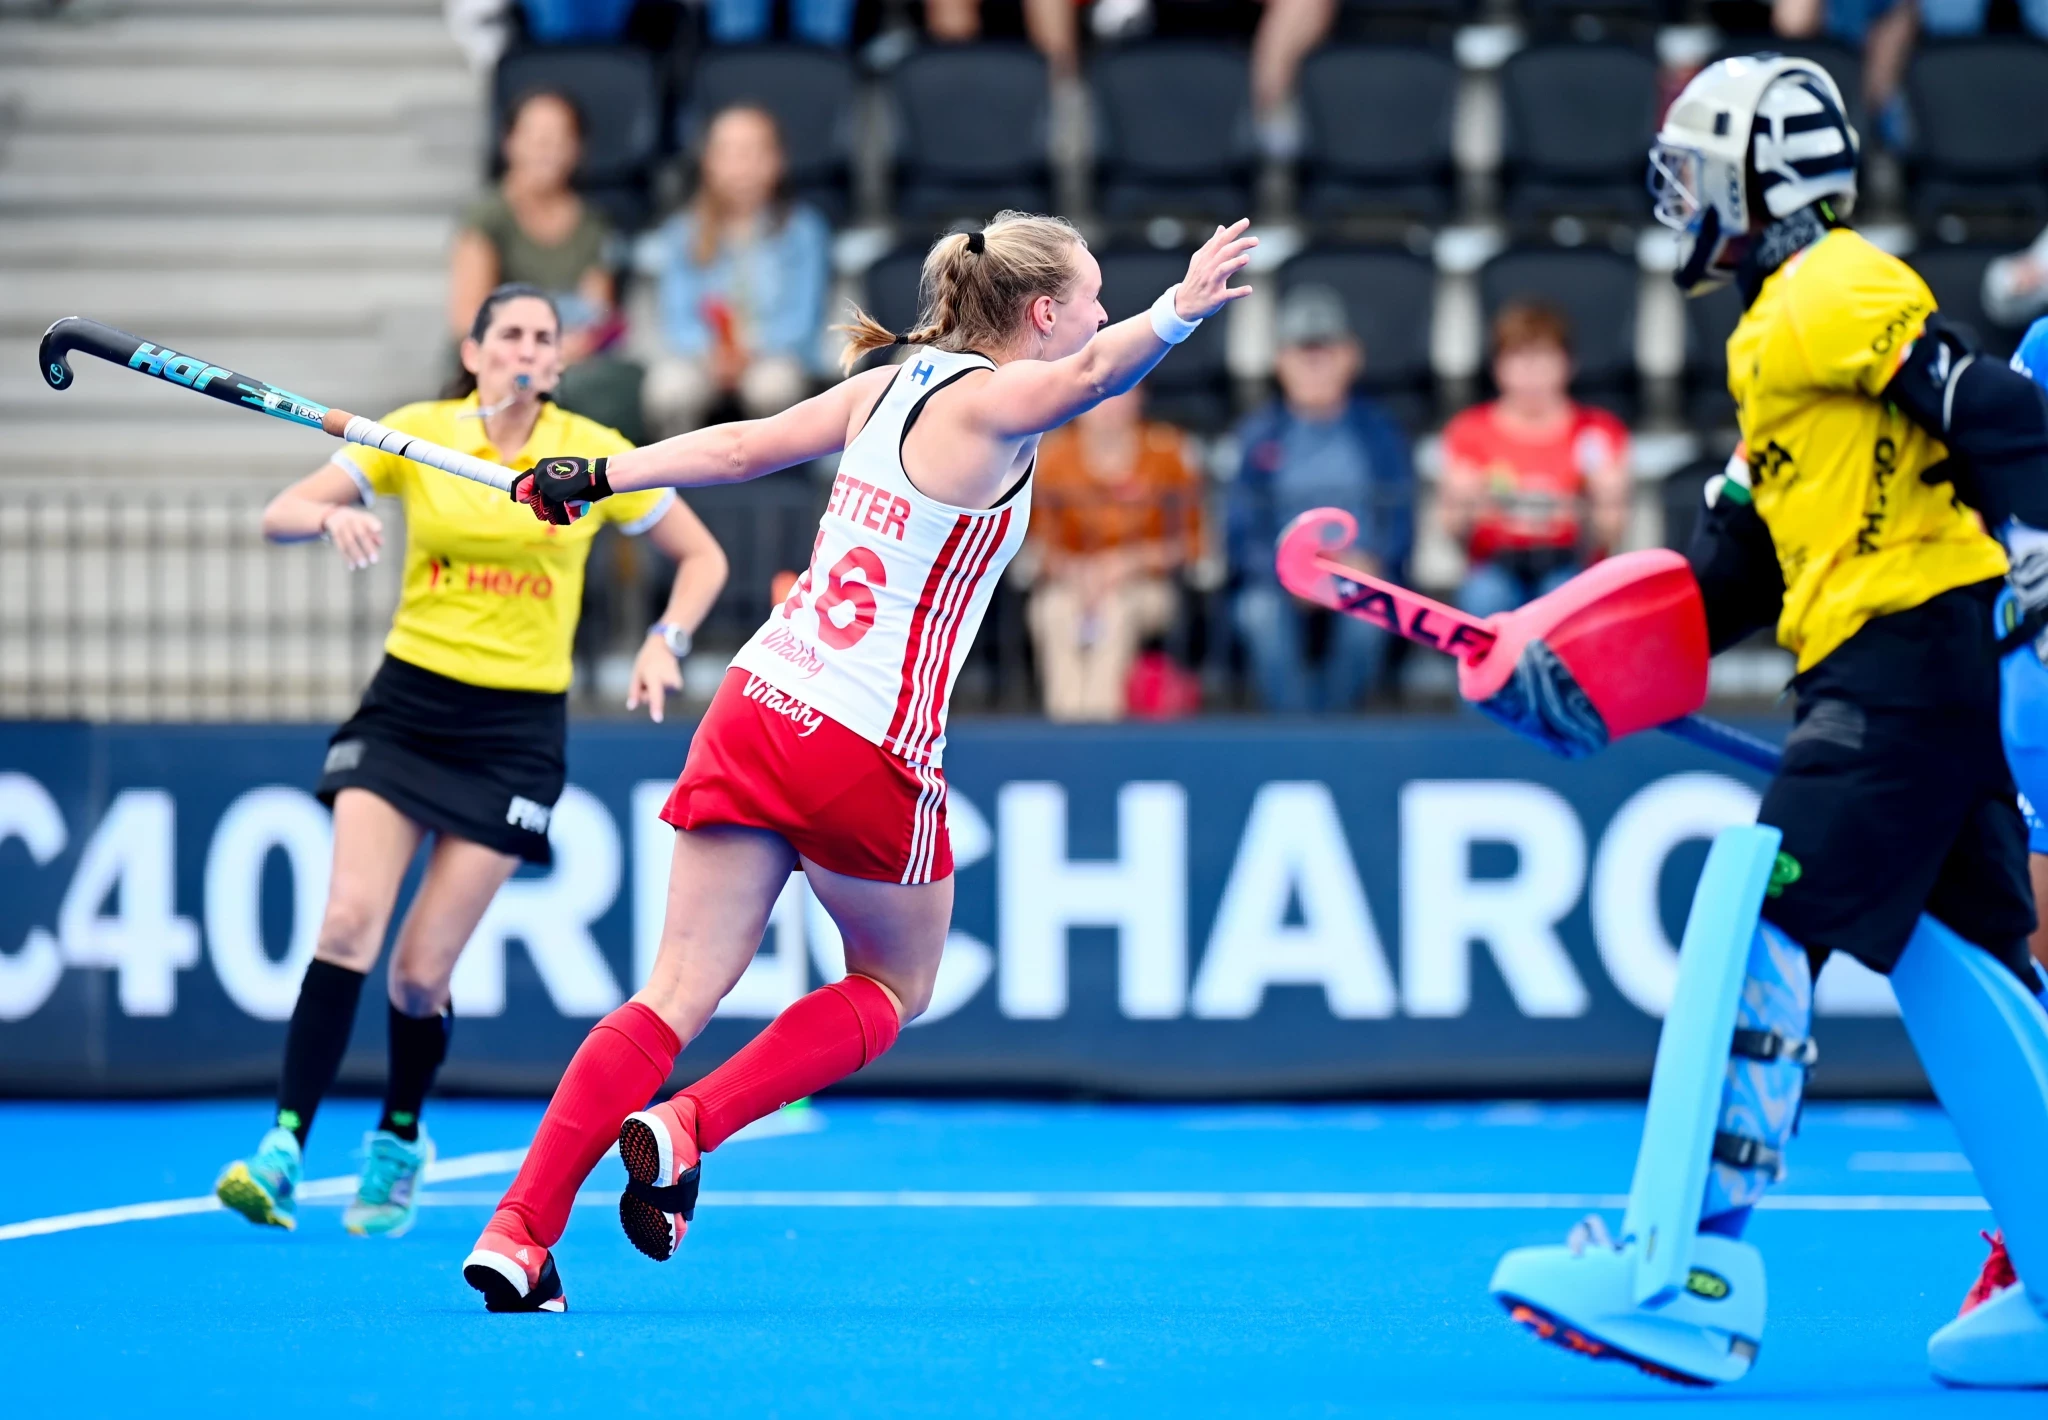 Izzy Petter put England ahead in their match against India but they came back to equalise as the match ended 1-1 ©England Hockey